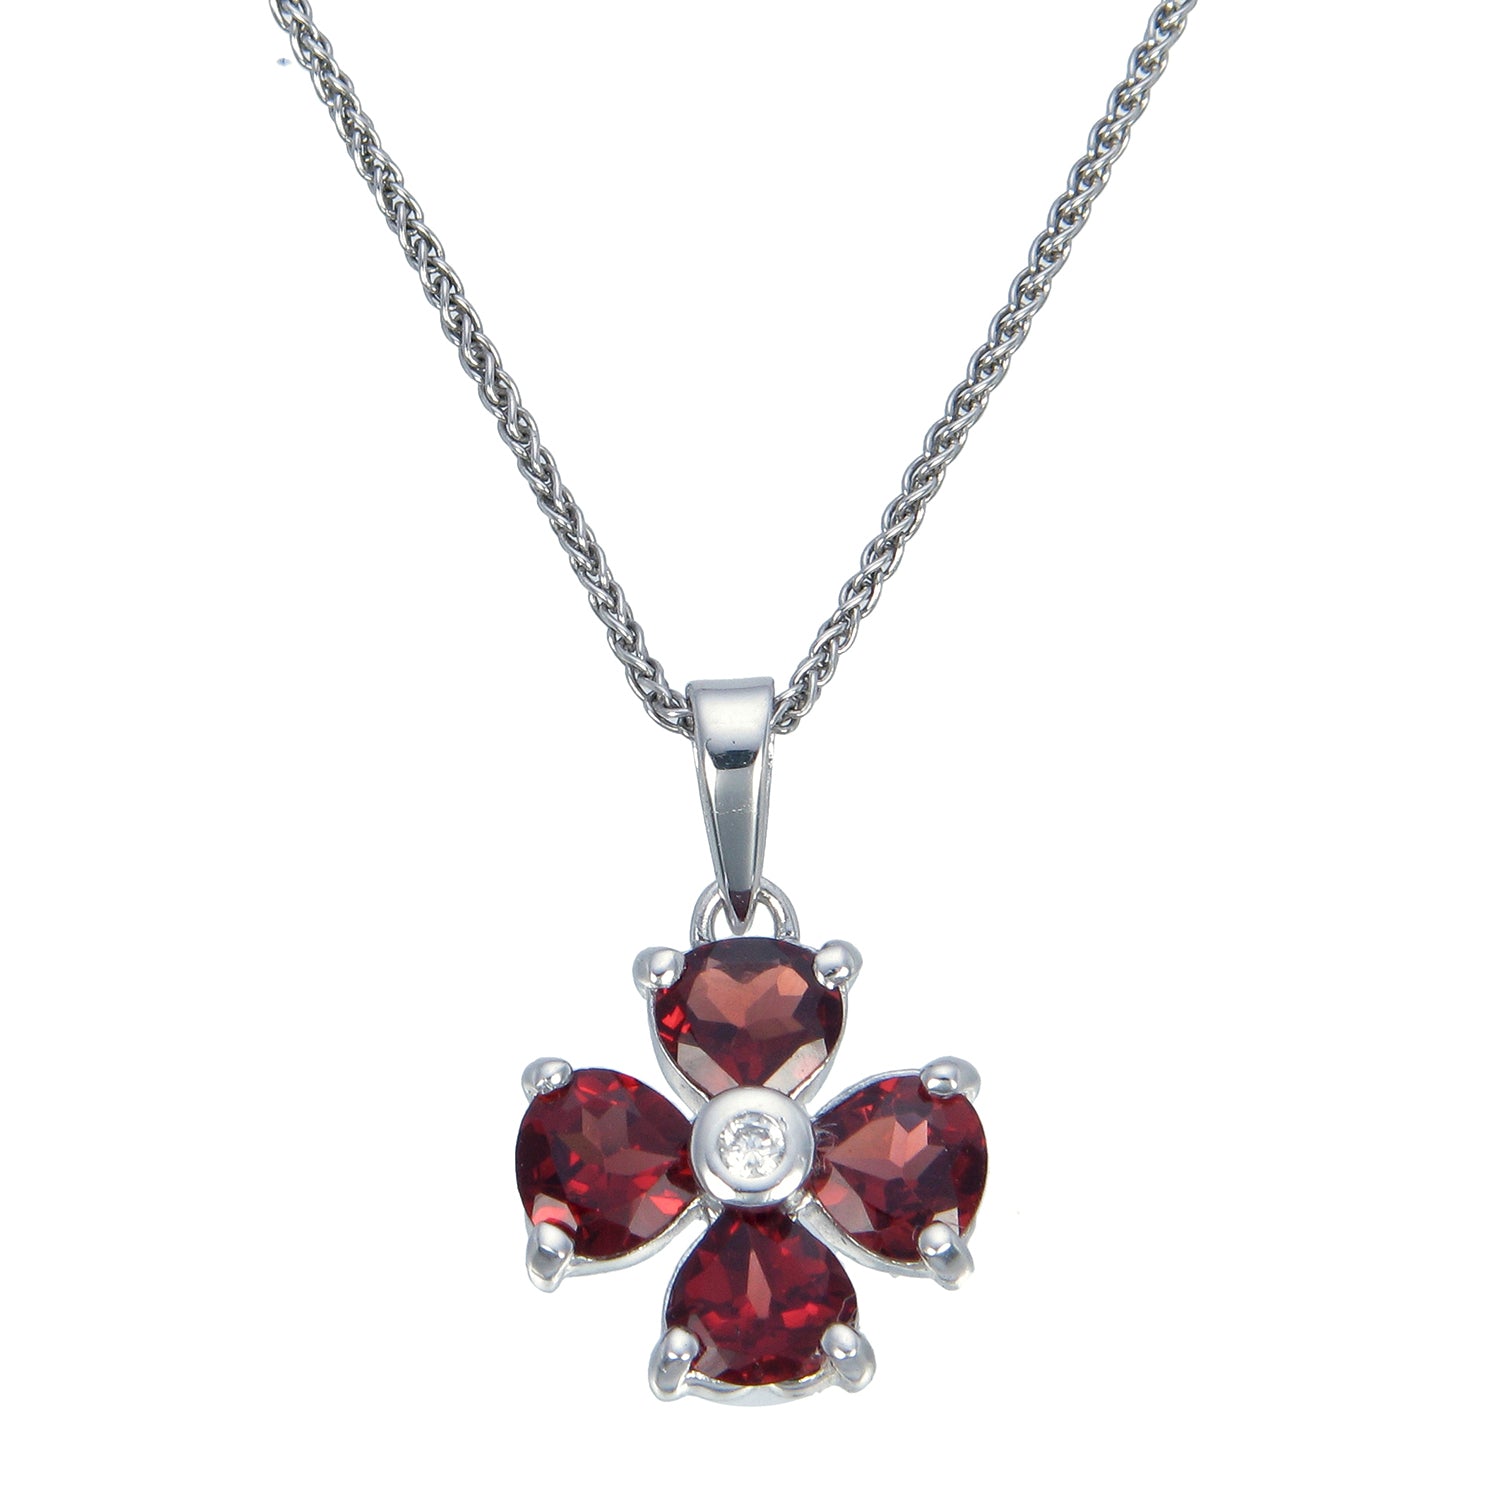 1.40 cttw Pendant Necklace, Garnet Pendant Necklace for Women in .925 Sterling Silver with Rhodium, 18 Inch Chain, Prong Setting